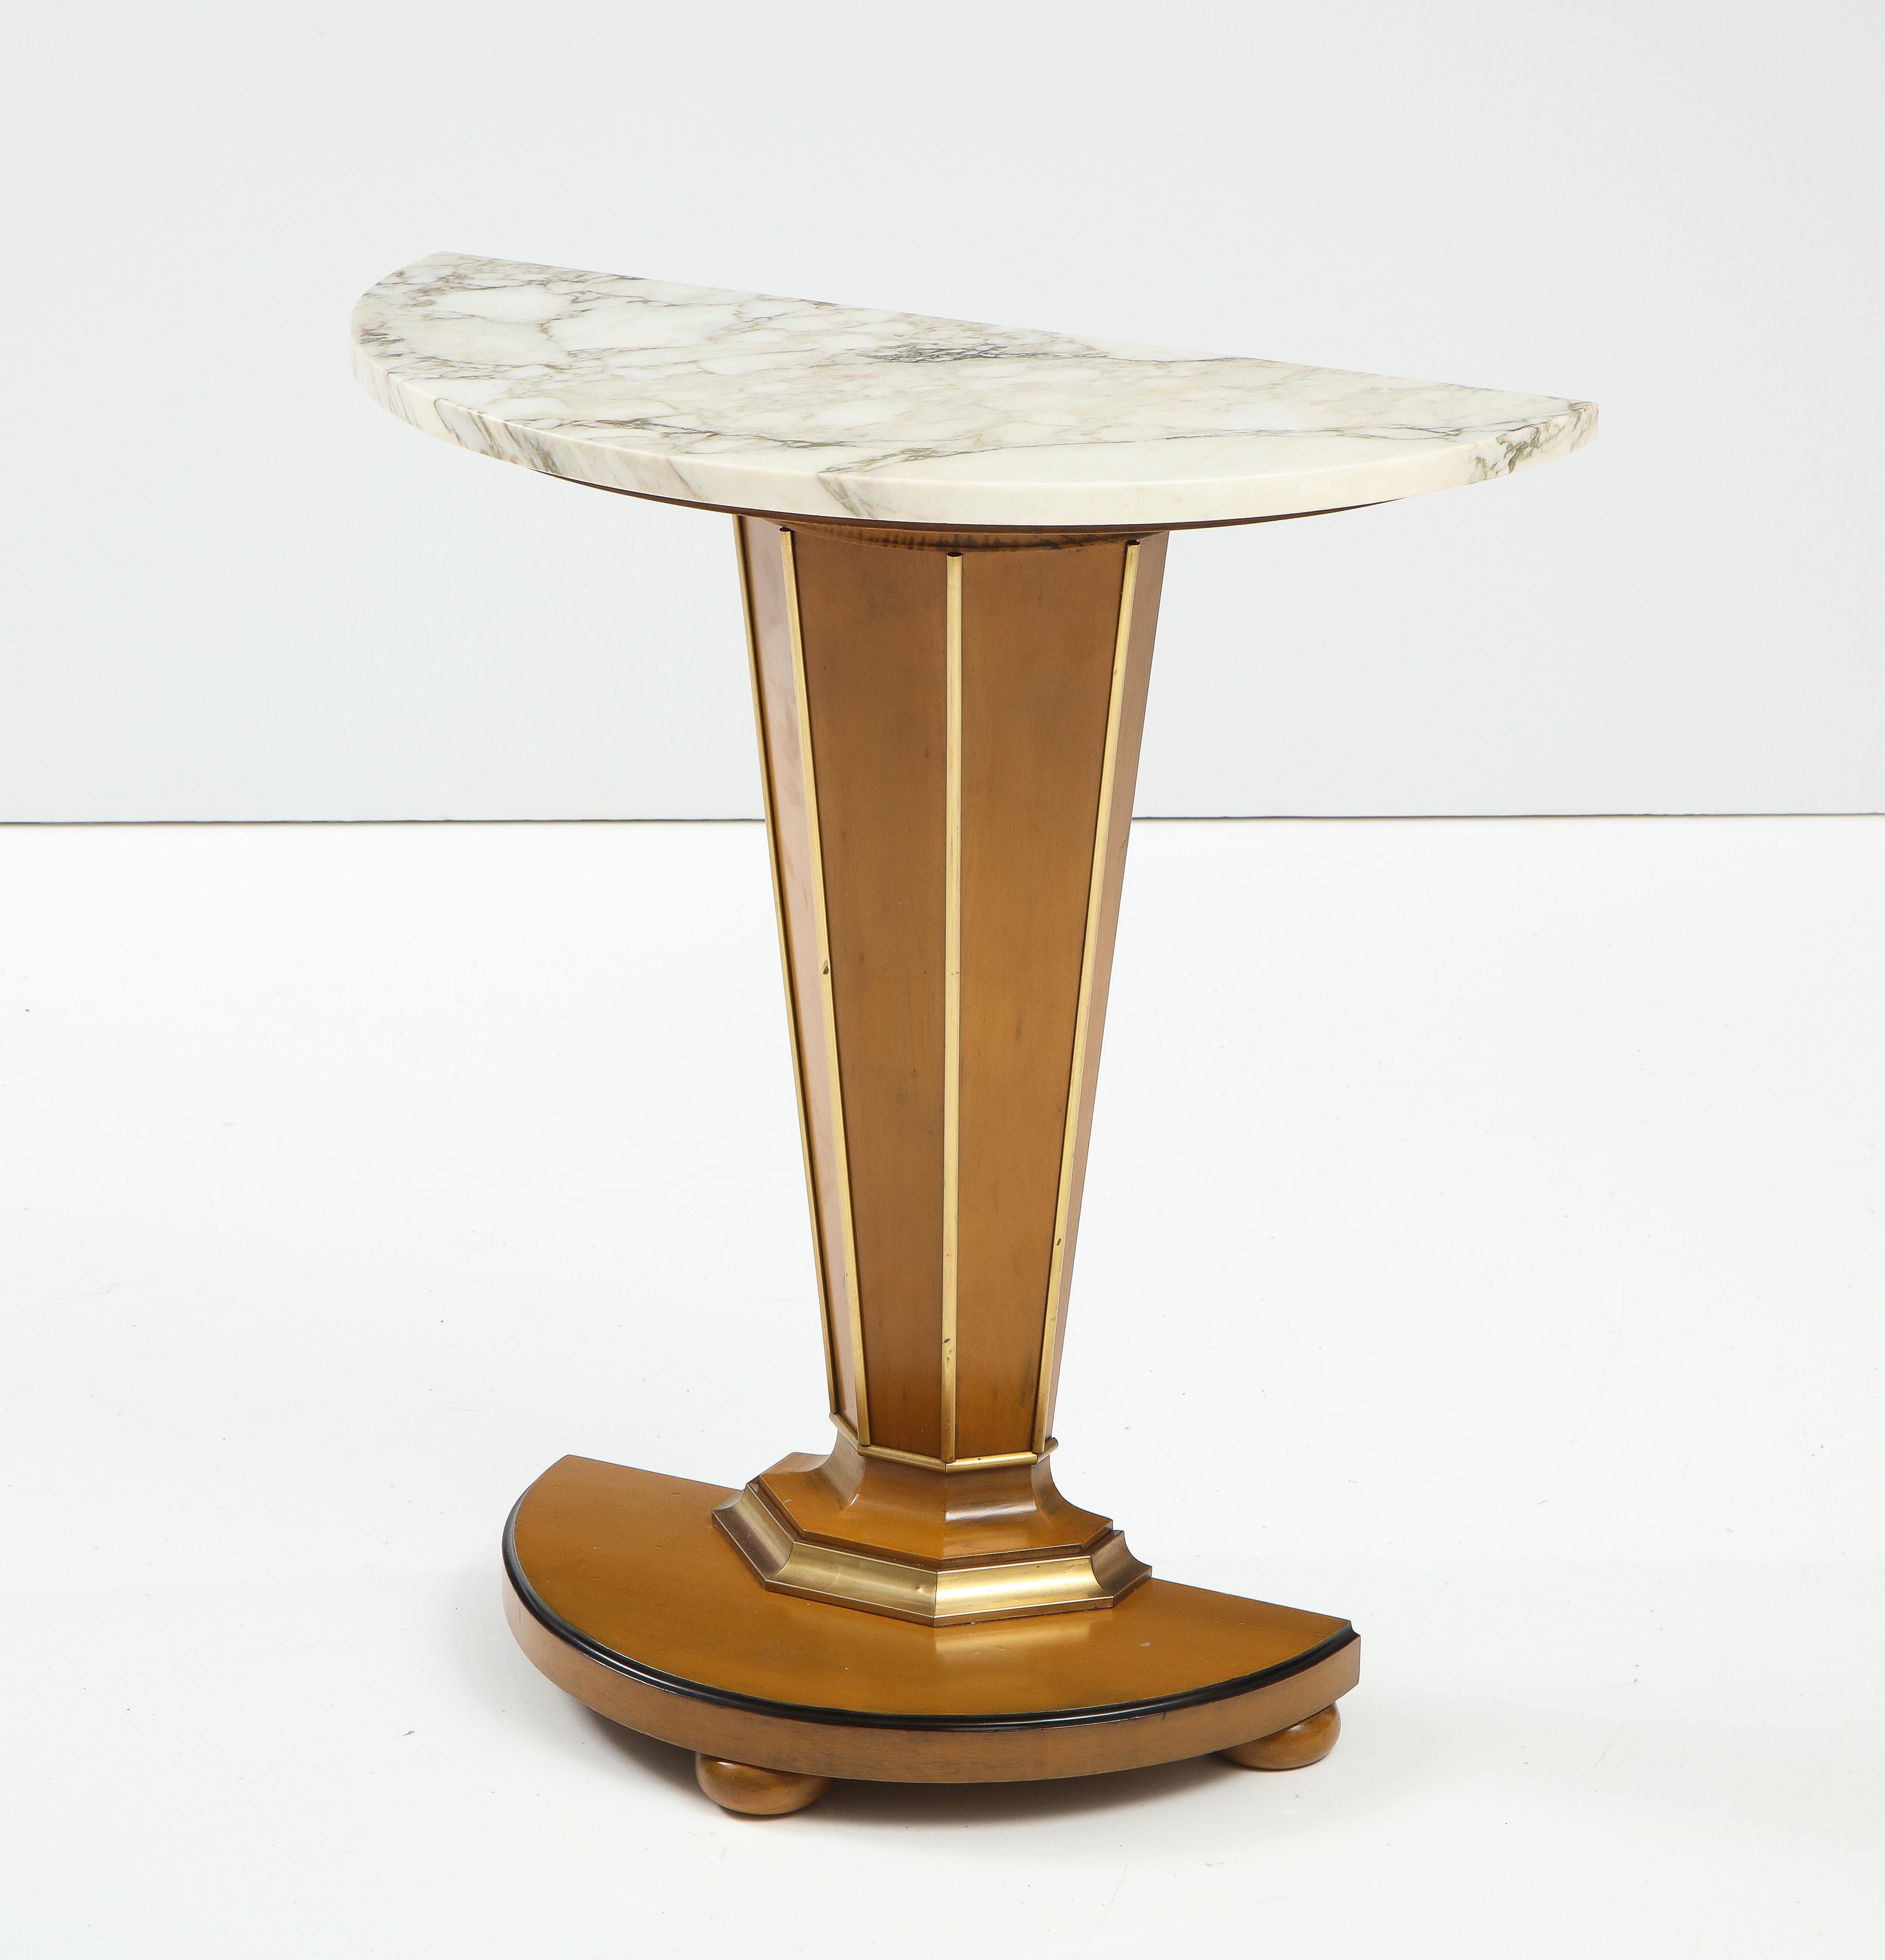 1960's Modern Demi-Lune With Carrara Marble Pedestal For Sale at 1stDibs